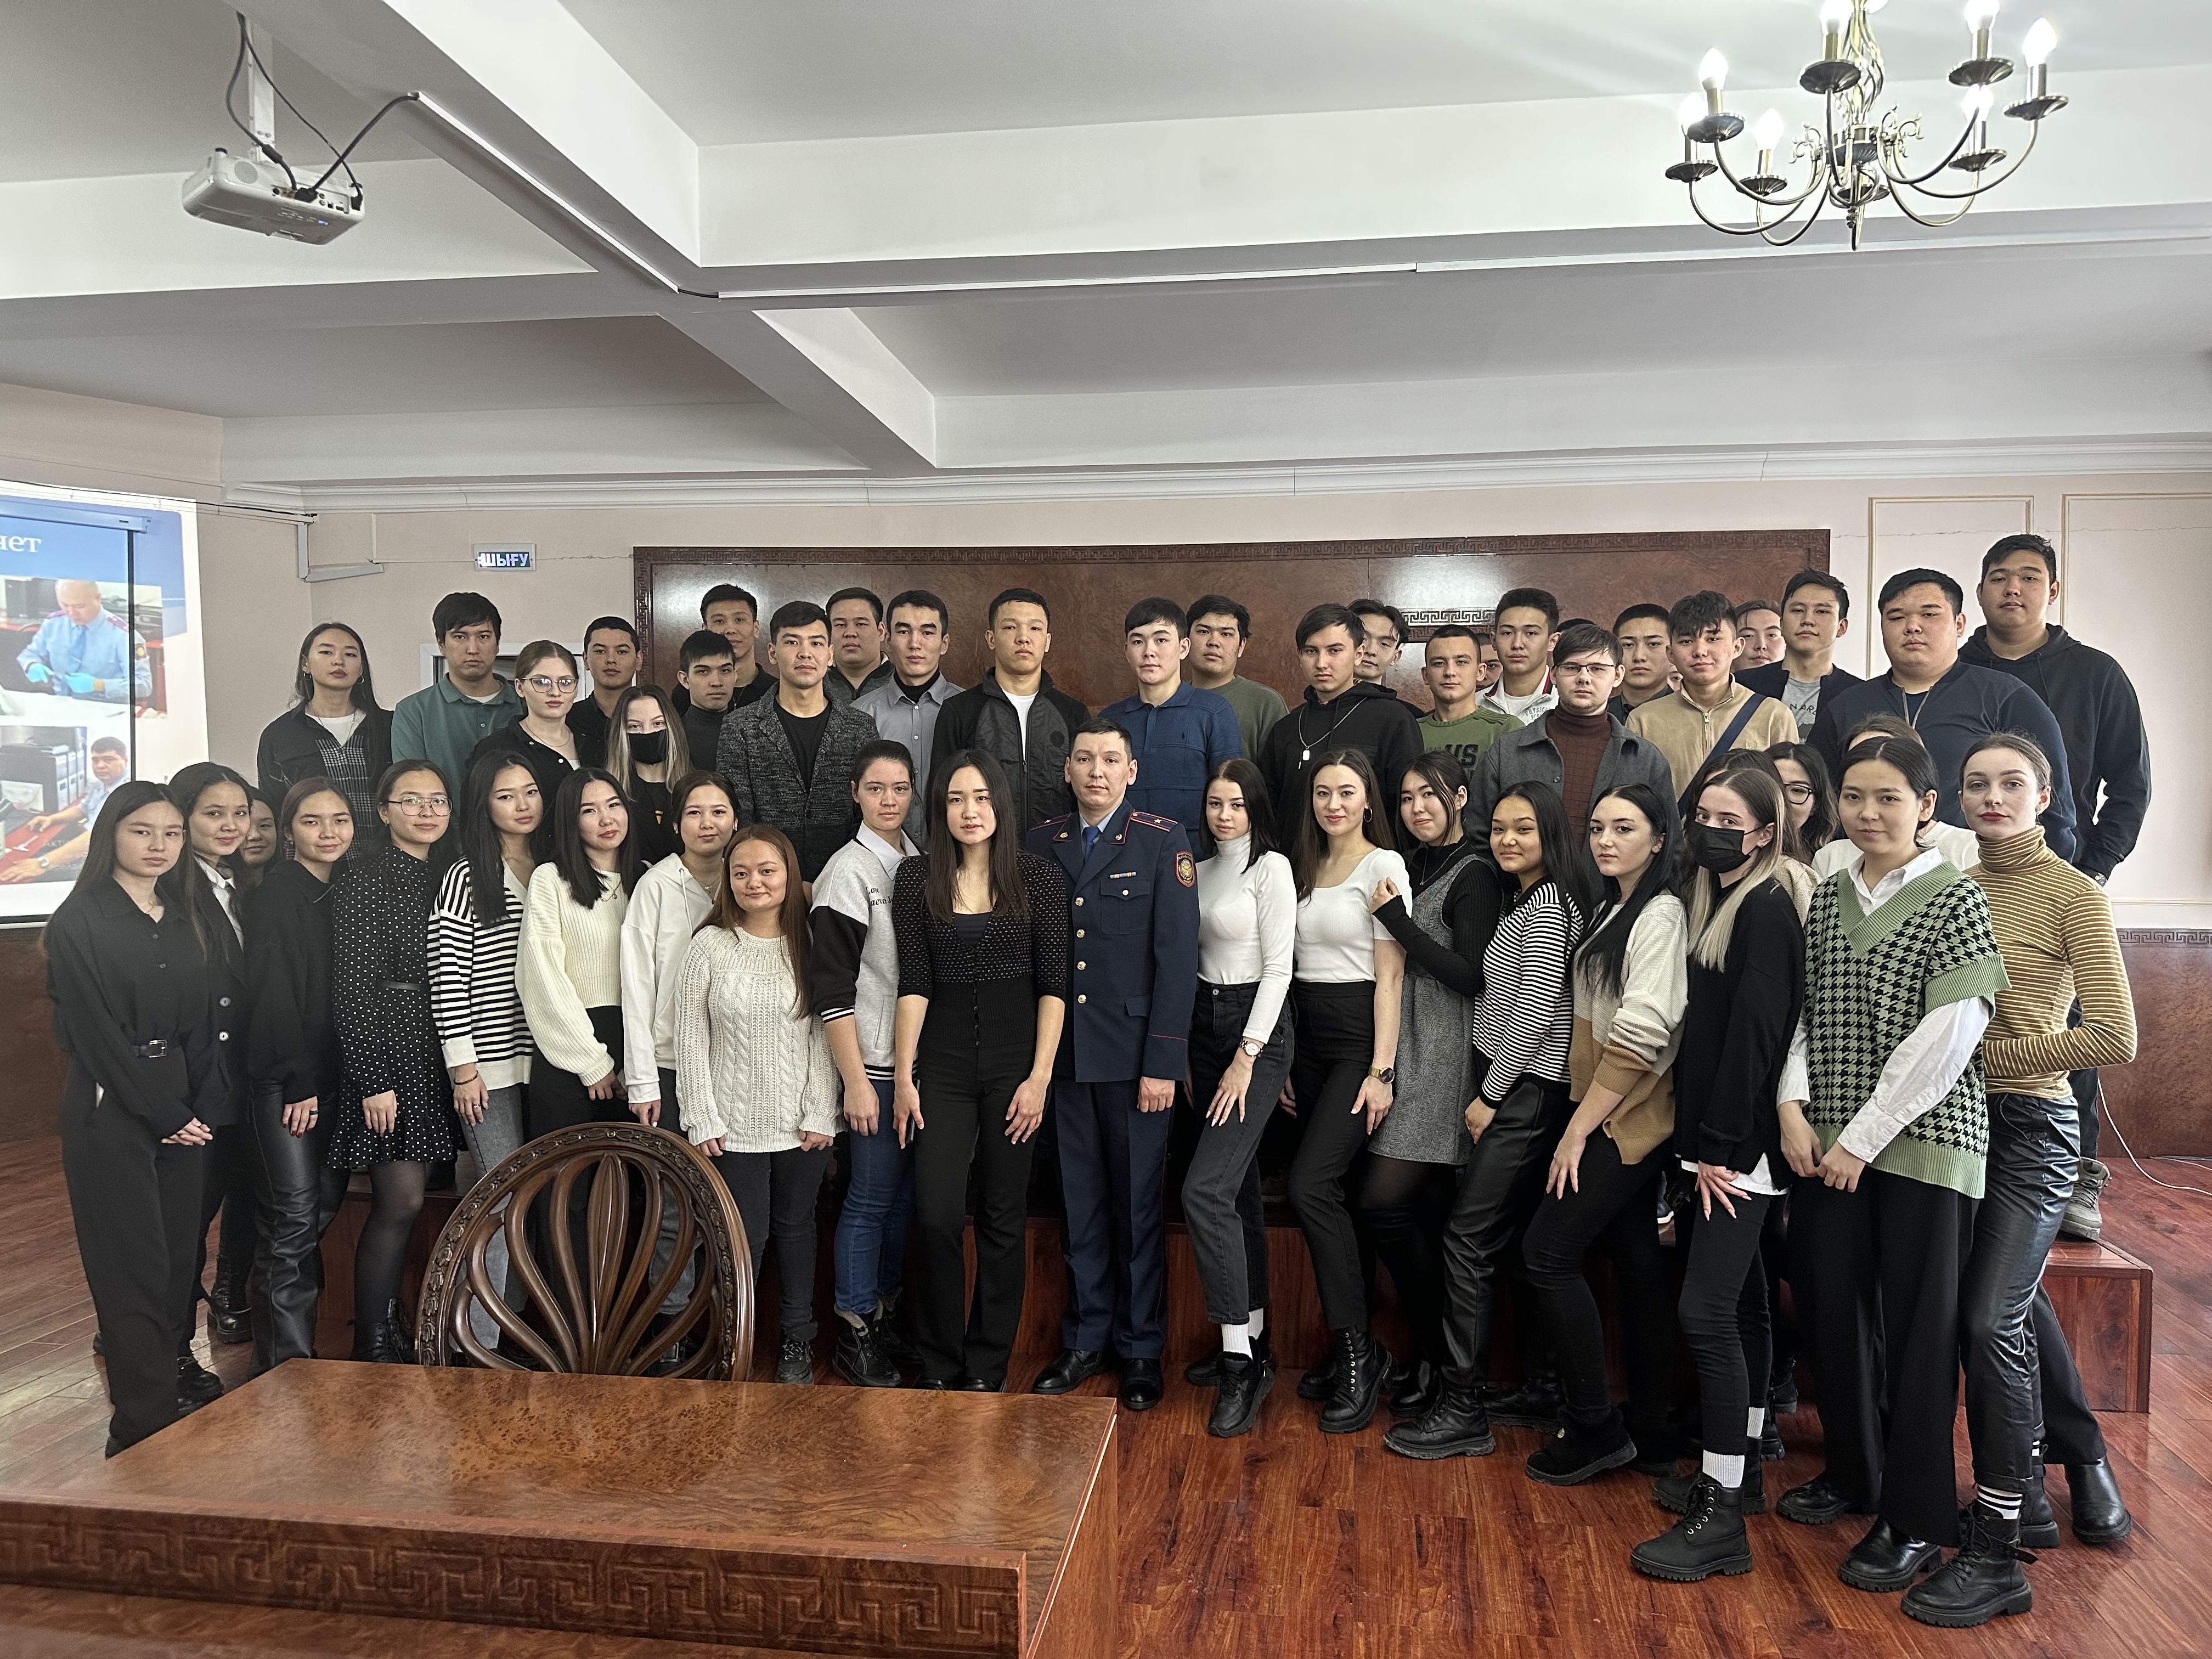 Guest lecture with the participation of a criminologist of the Police Department on transport